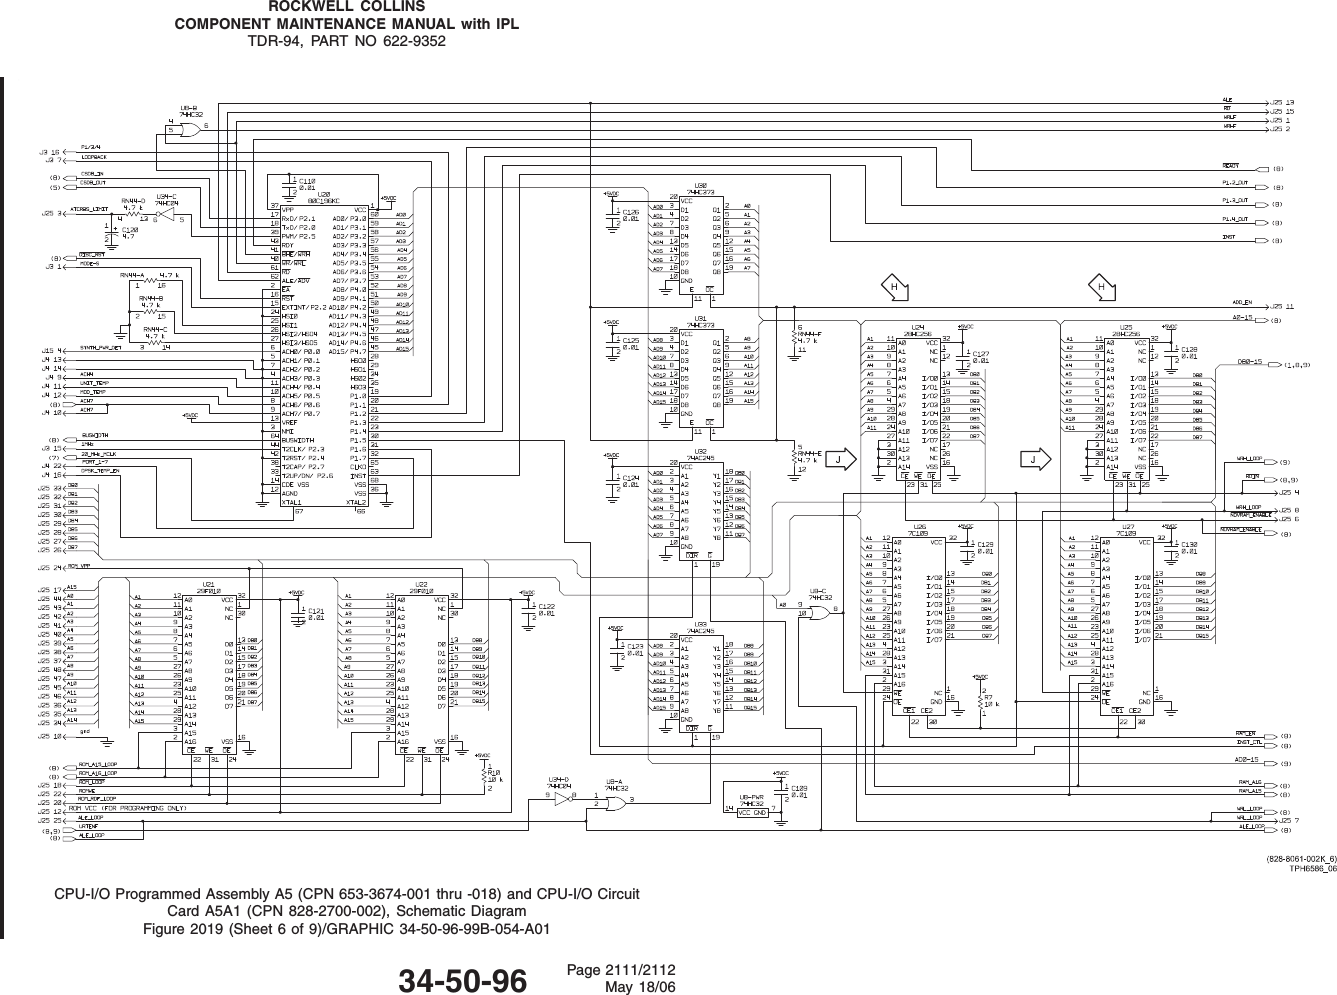 ROCKWELL COLLINSCOMPONENT MAINTENANCE MANUAL with IPLTDR-94, PART NO 622-9352CPU-I/O Programmed Assembly A5 (CPN 653-3674-001 thru -018) and CPU-I/O CircuitCard A5A1 (CPN 828-2700-002), Schematic DiagramFigure 2019 (Sheet 6 of 9)/GRAPHIC 34-50-96-99B-054-A0134-50-96 Page 2111/2112May 18/06